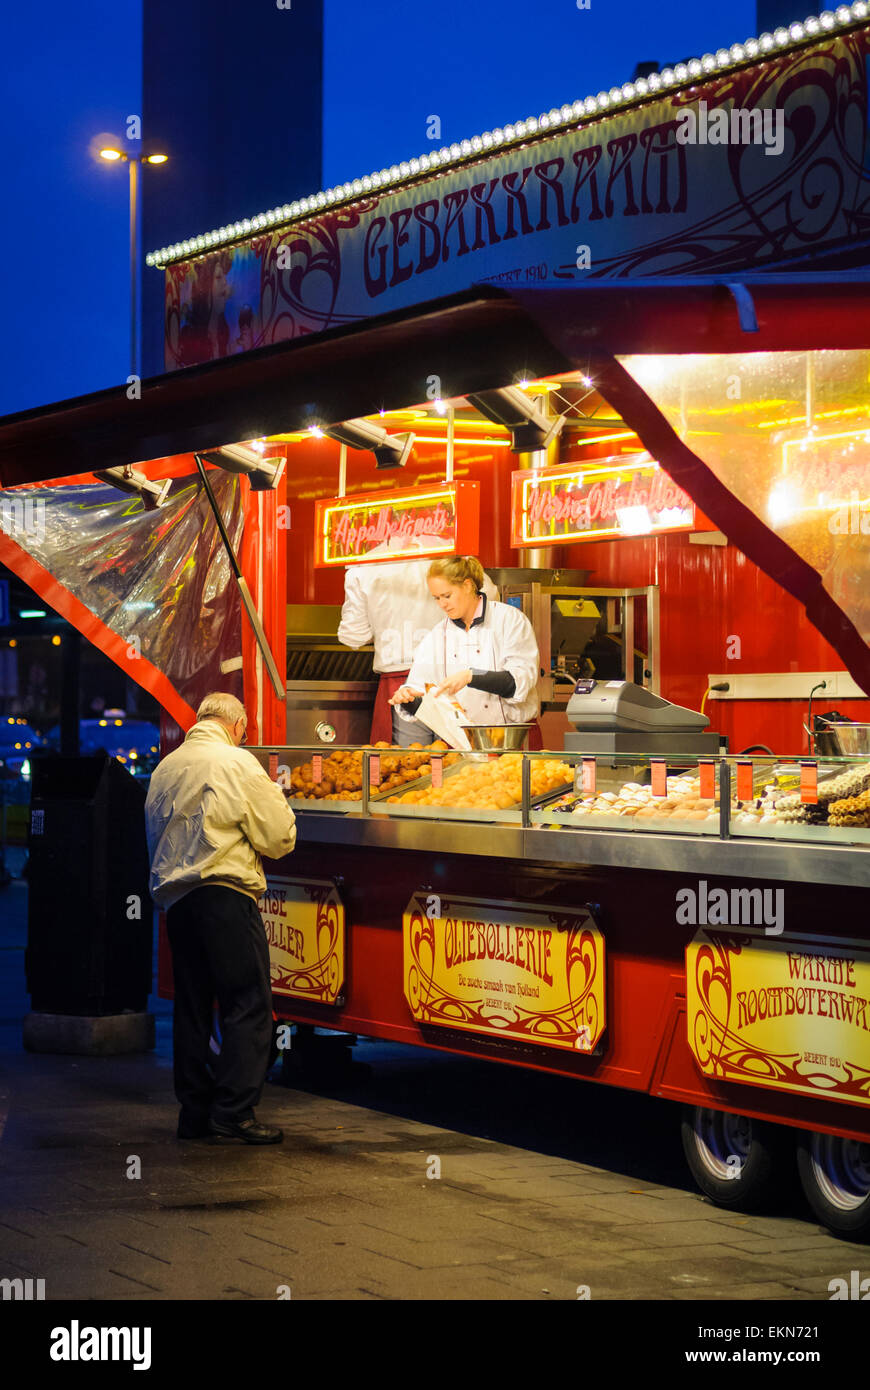 Snack stall at Amsterdam's Schiphol Airport, Holland, selling traditional Dutch food including waffles and pastries, in the evening. Food stand. Stock Photo